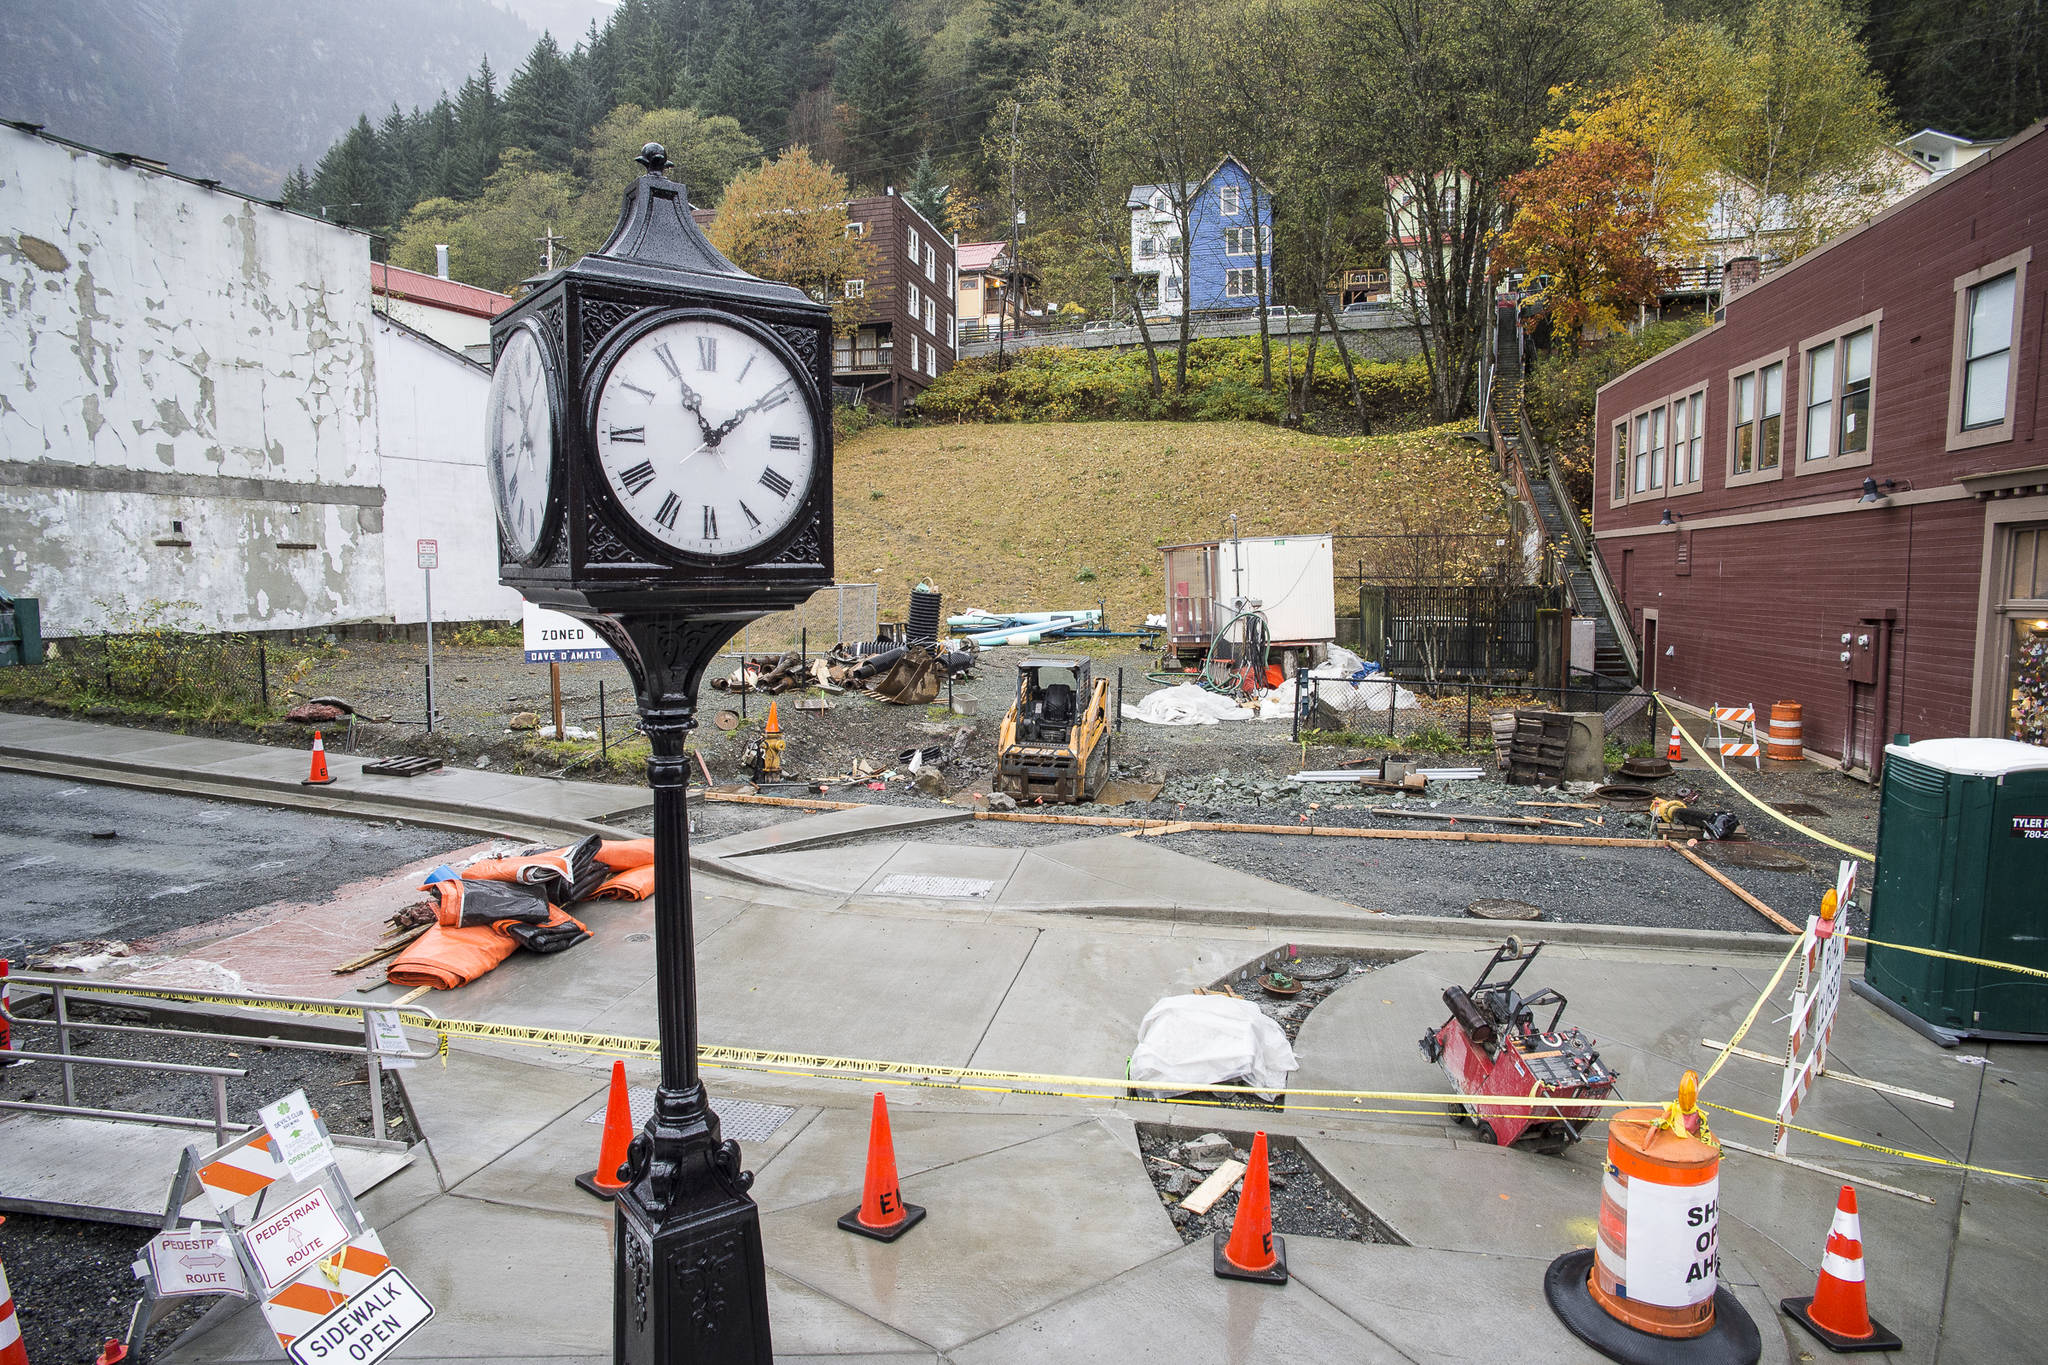 The city has received an offer to buy the area known as Pocket Park at Front and Franklin Streets to be used as a food court, but is likely to hold off on deciding a long-term future for the park. (Michael Penn | Juneau Empire)